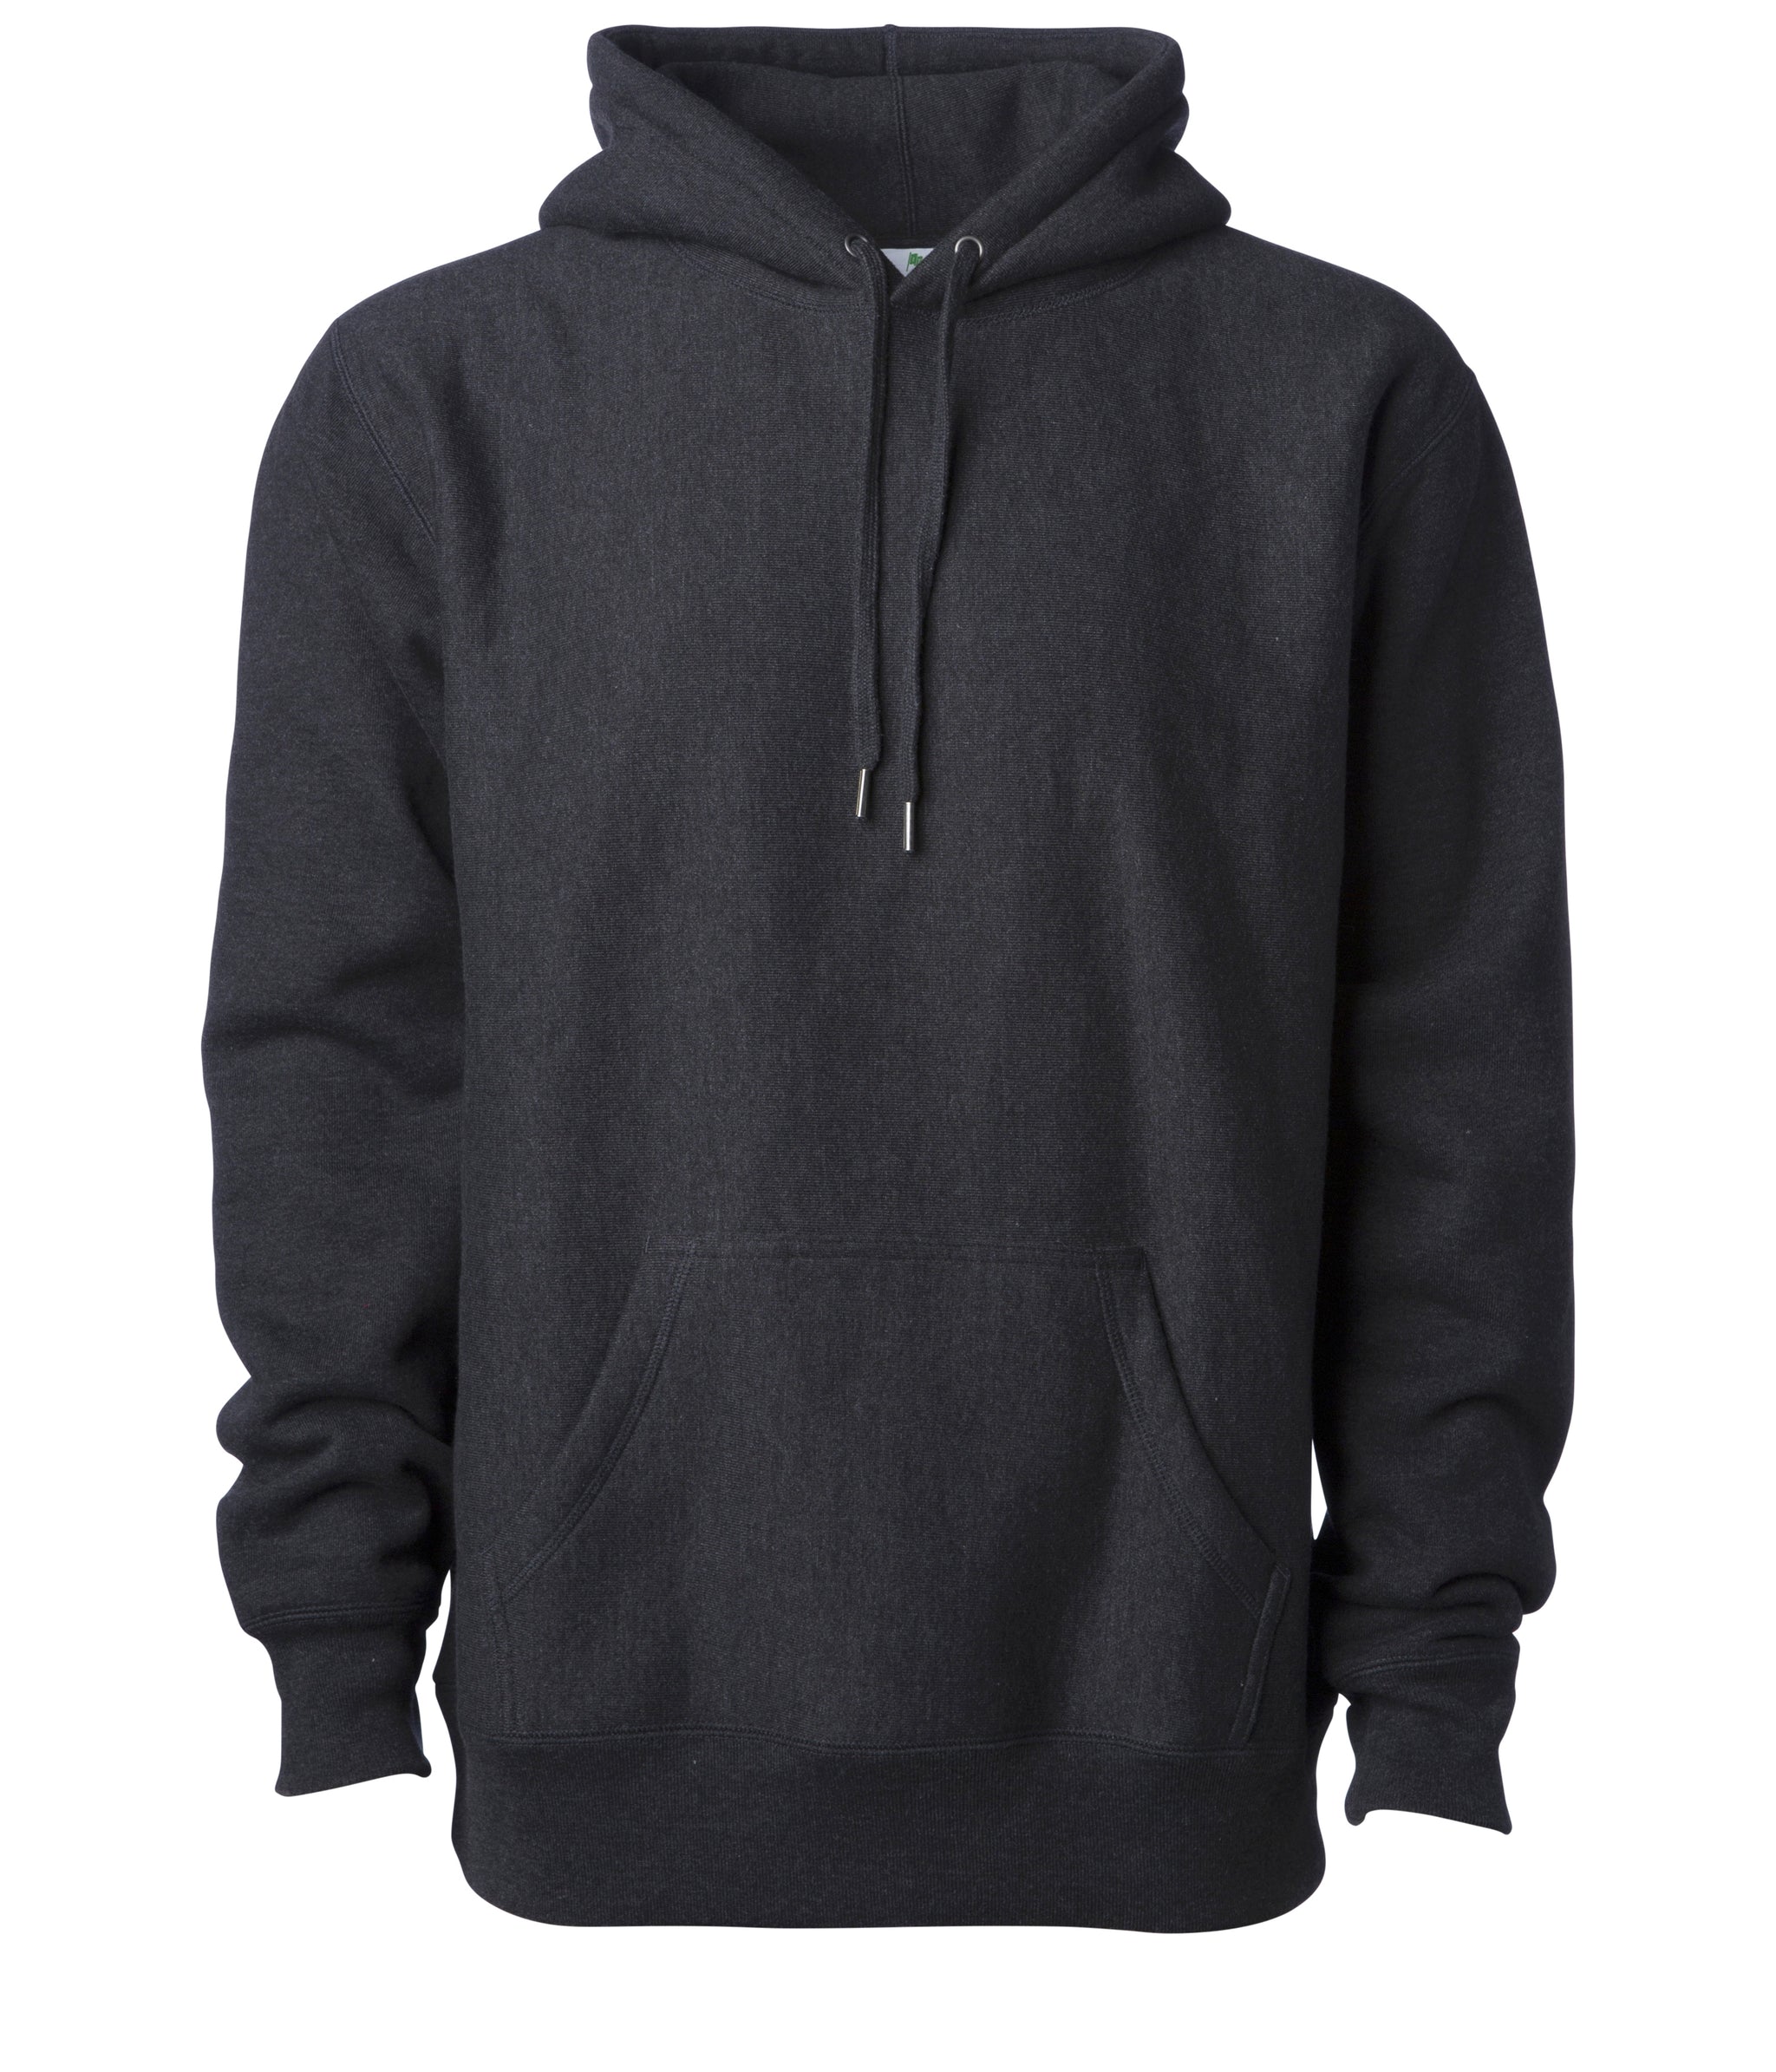 Graphic Cotton Hoodie - Men - Ready-to-Wear